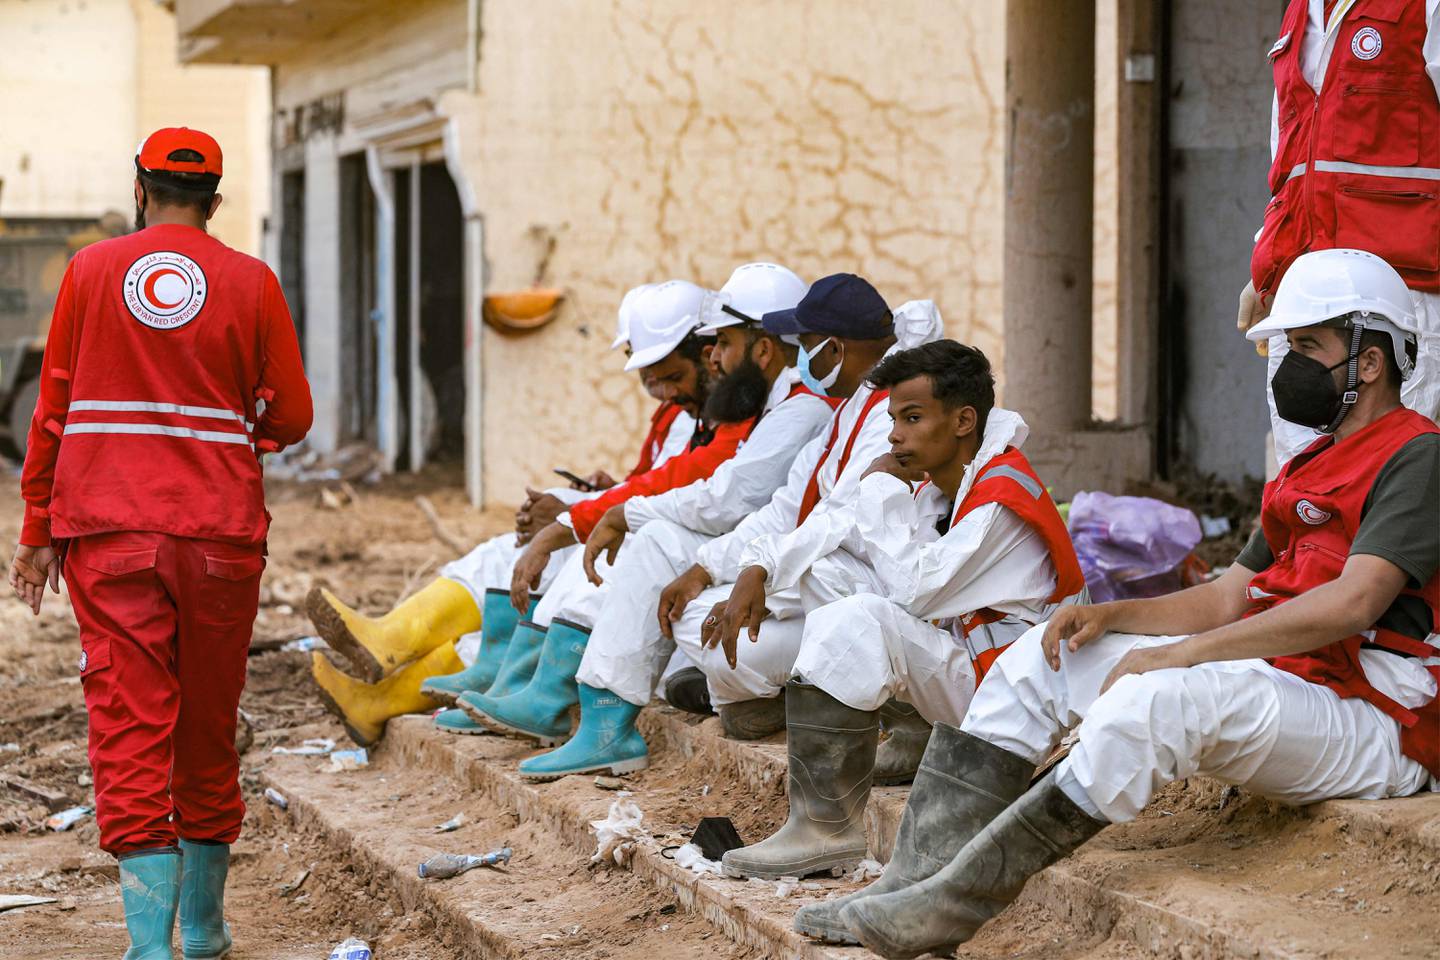 Rescue teams sit in Libya's eastern city of Derna on September 18, 2023, following deadly flash floods. A week after a tsunami-sized flash flood devastated the Libyan coastal city of Derna, sweeping thousands to their deaths, the international aid effort to help the grieving survivors slowly gathered pace. The enormous flood, fuelled by torrential rains on September 10, had broken through two upstream dams and sent a giant wave crashing down the previously dry river bed, or wadi, that bisects the city of about 100,000 people. (Photo by Mahmud Turkia / AFP)